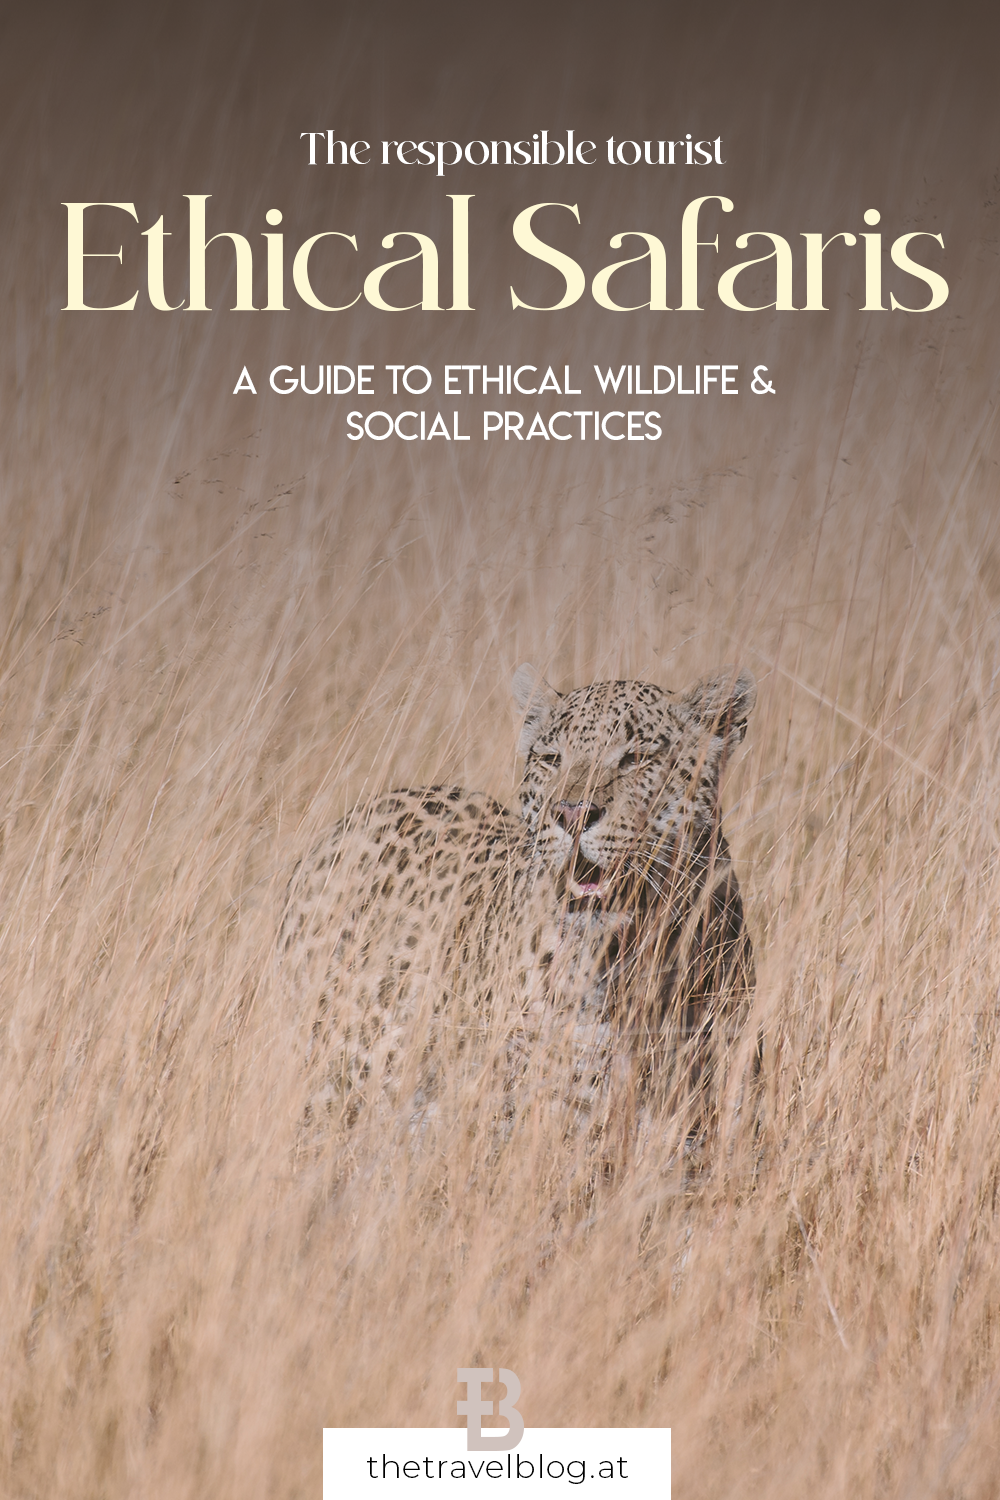 Ethical safaris: A travel guide for responsible safaris that protect wildlife and support people